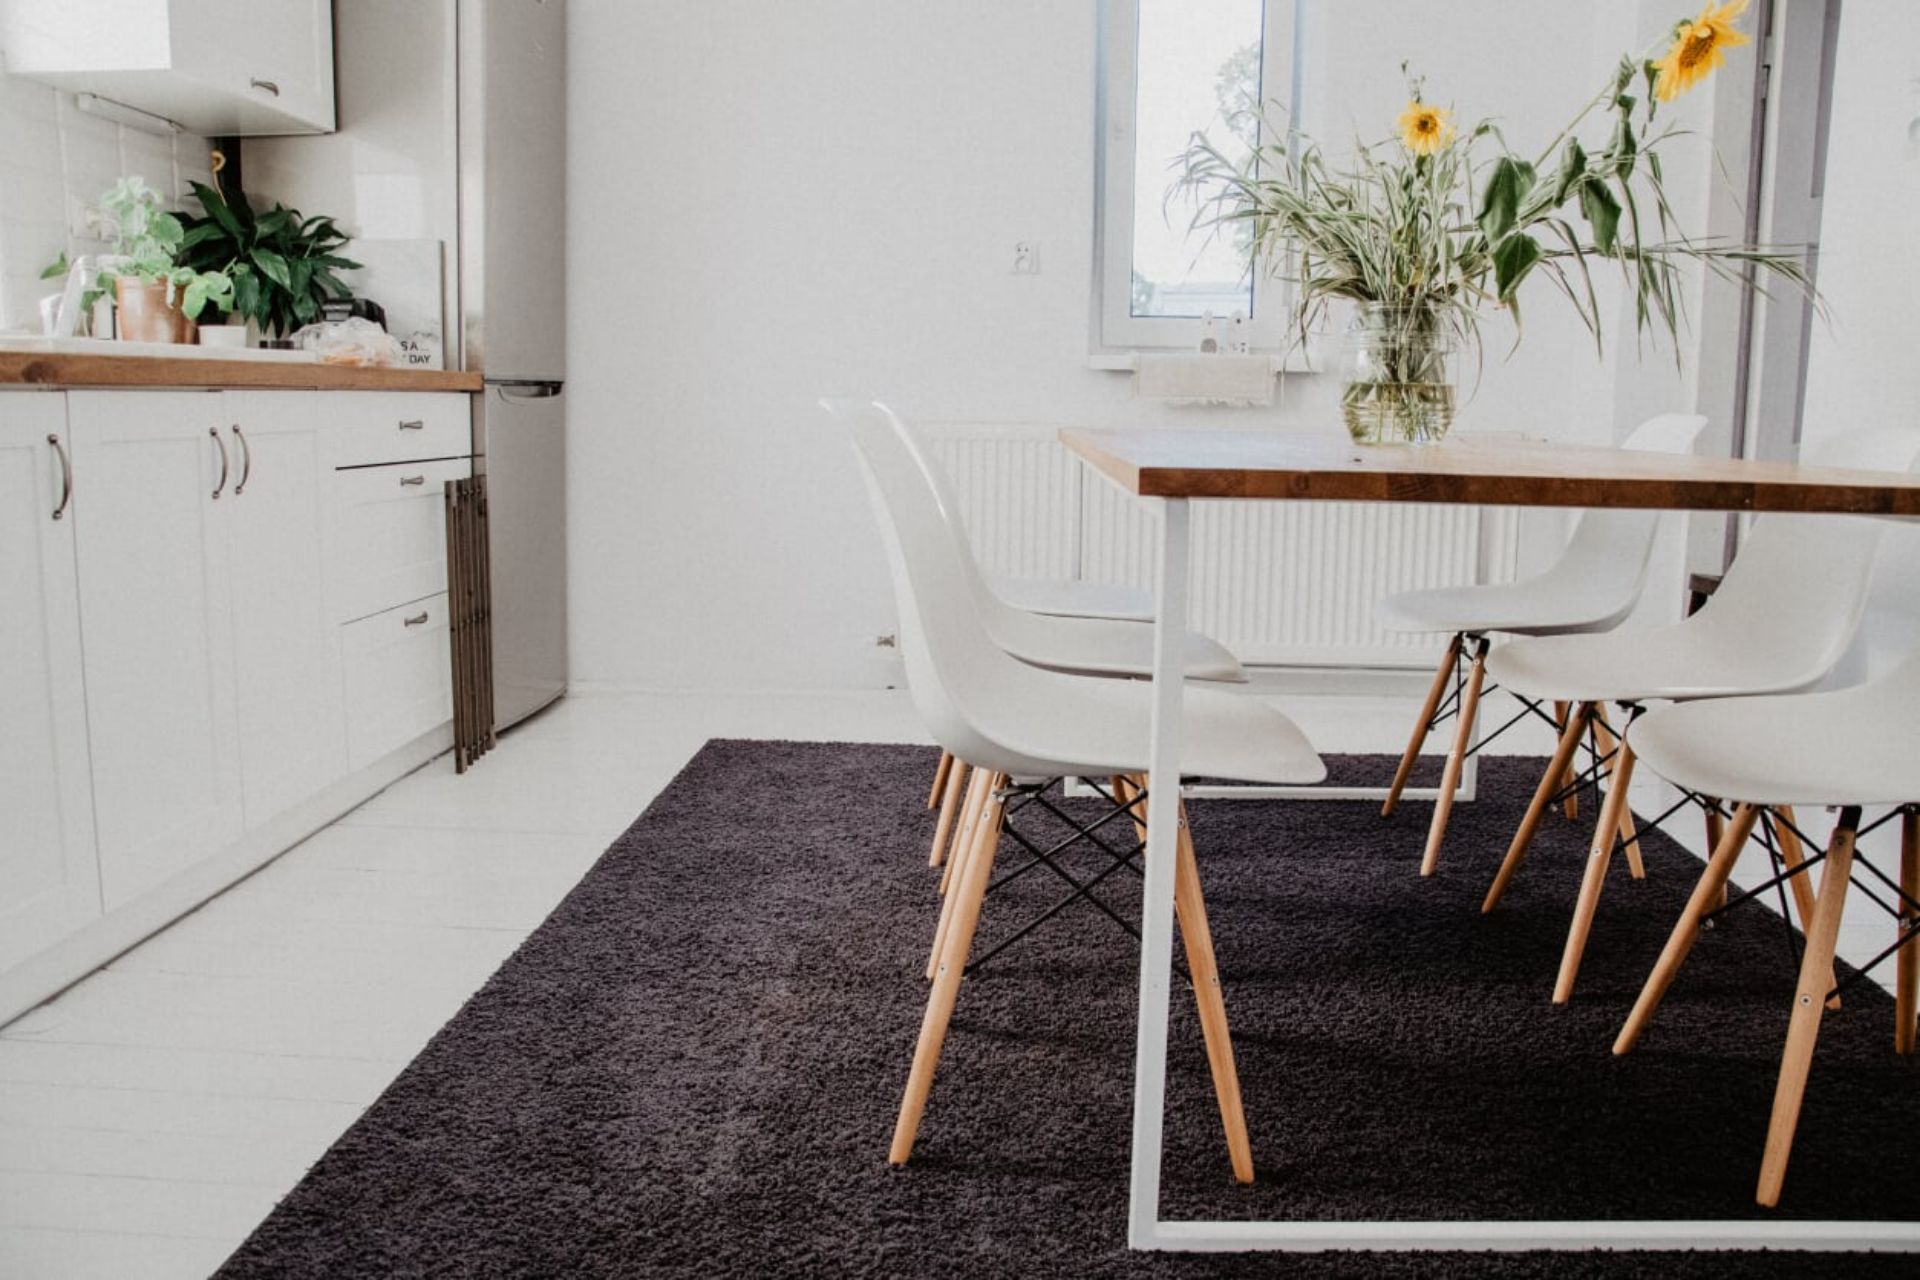 What`s The Difference Between Scandinavian And Minimalist Design